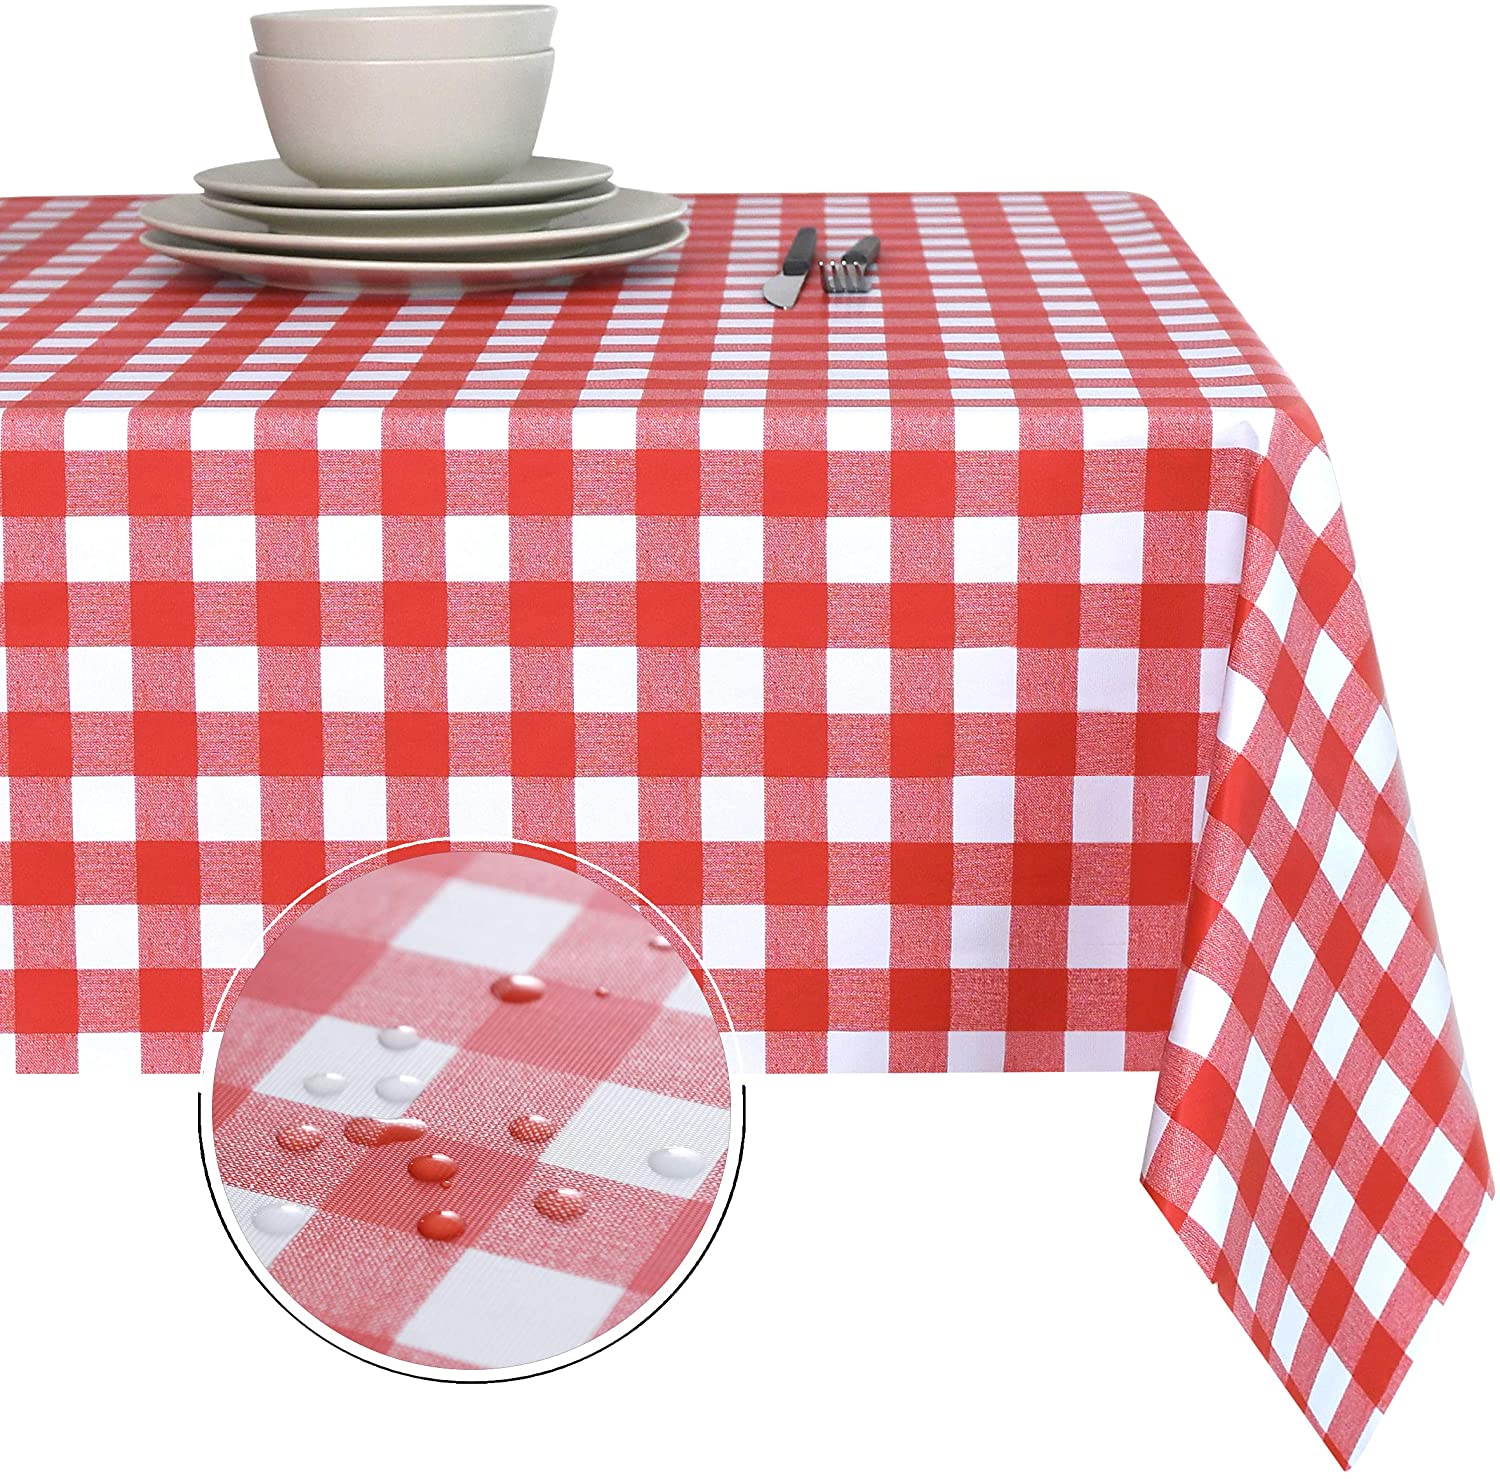 Obstal PVC Waterproof Rectangular Outdoor Tablecloth, 54 x 78-Inch